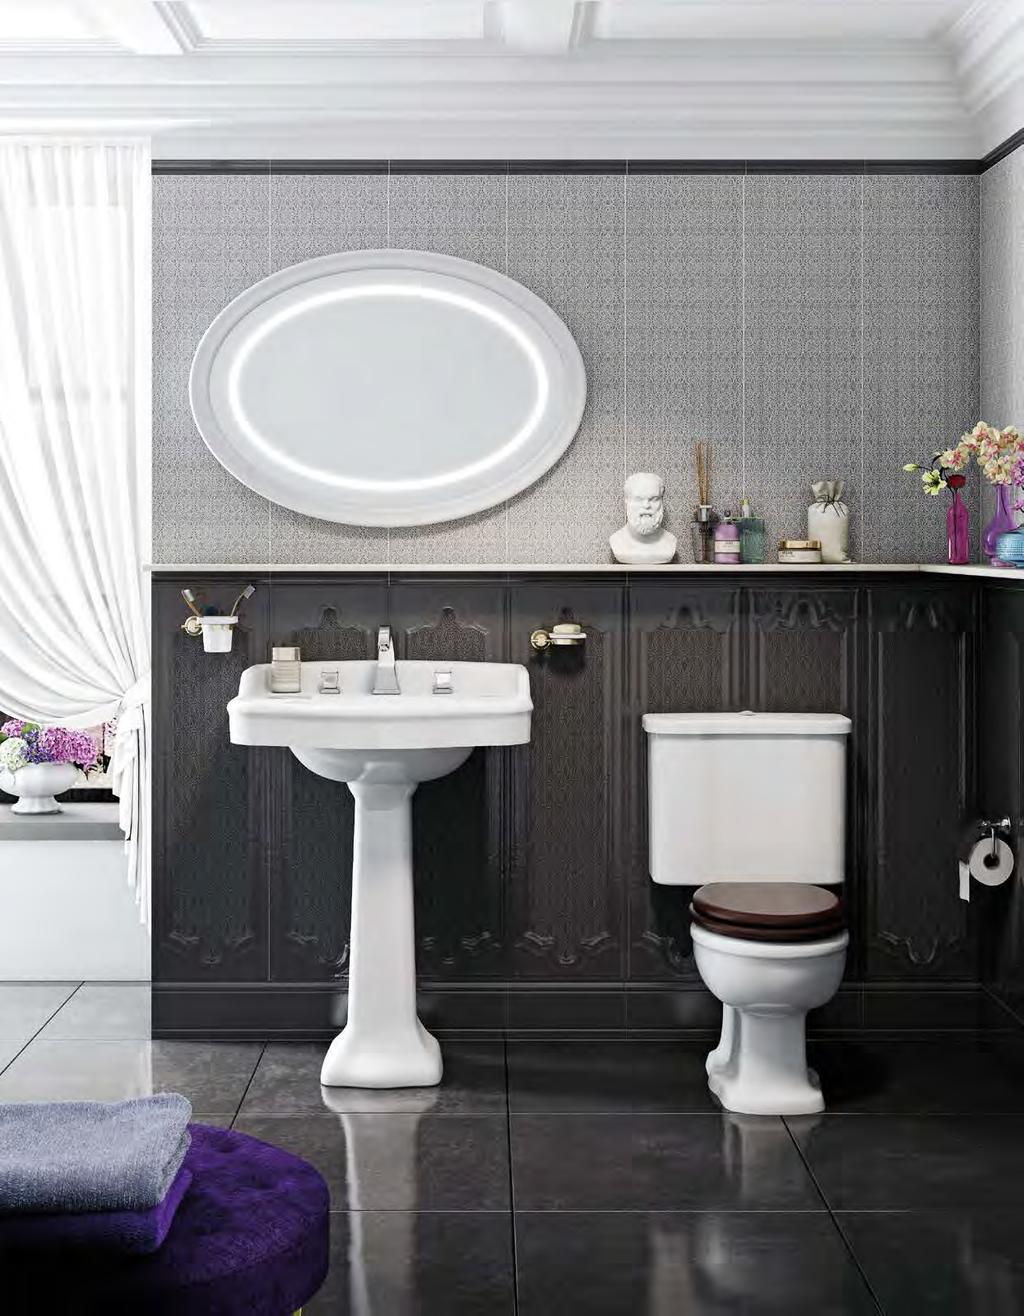 ELEGANCE The traditionally-styled Elegance range, with characterful period touches, elegant lines and refined proportions, is the range of choice for adding an air of retro-grandeur to your bathroom.